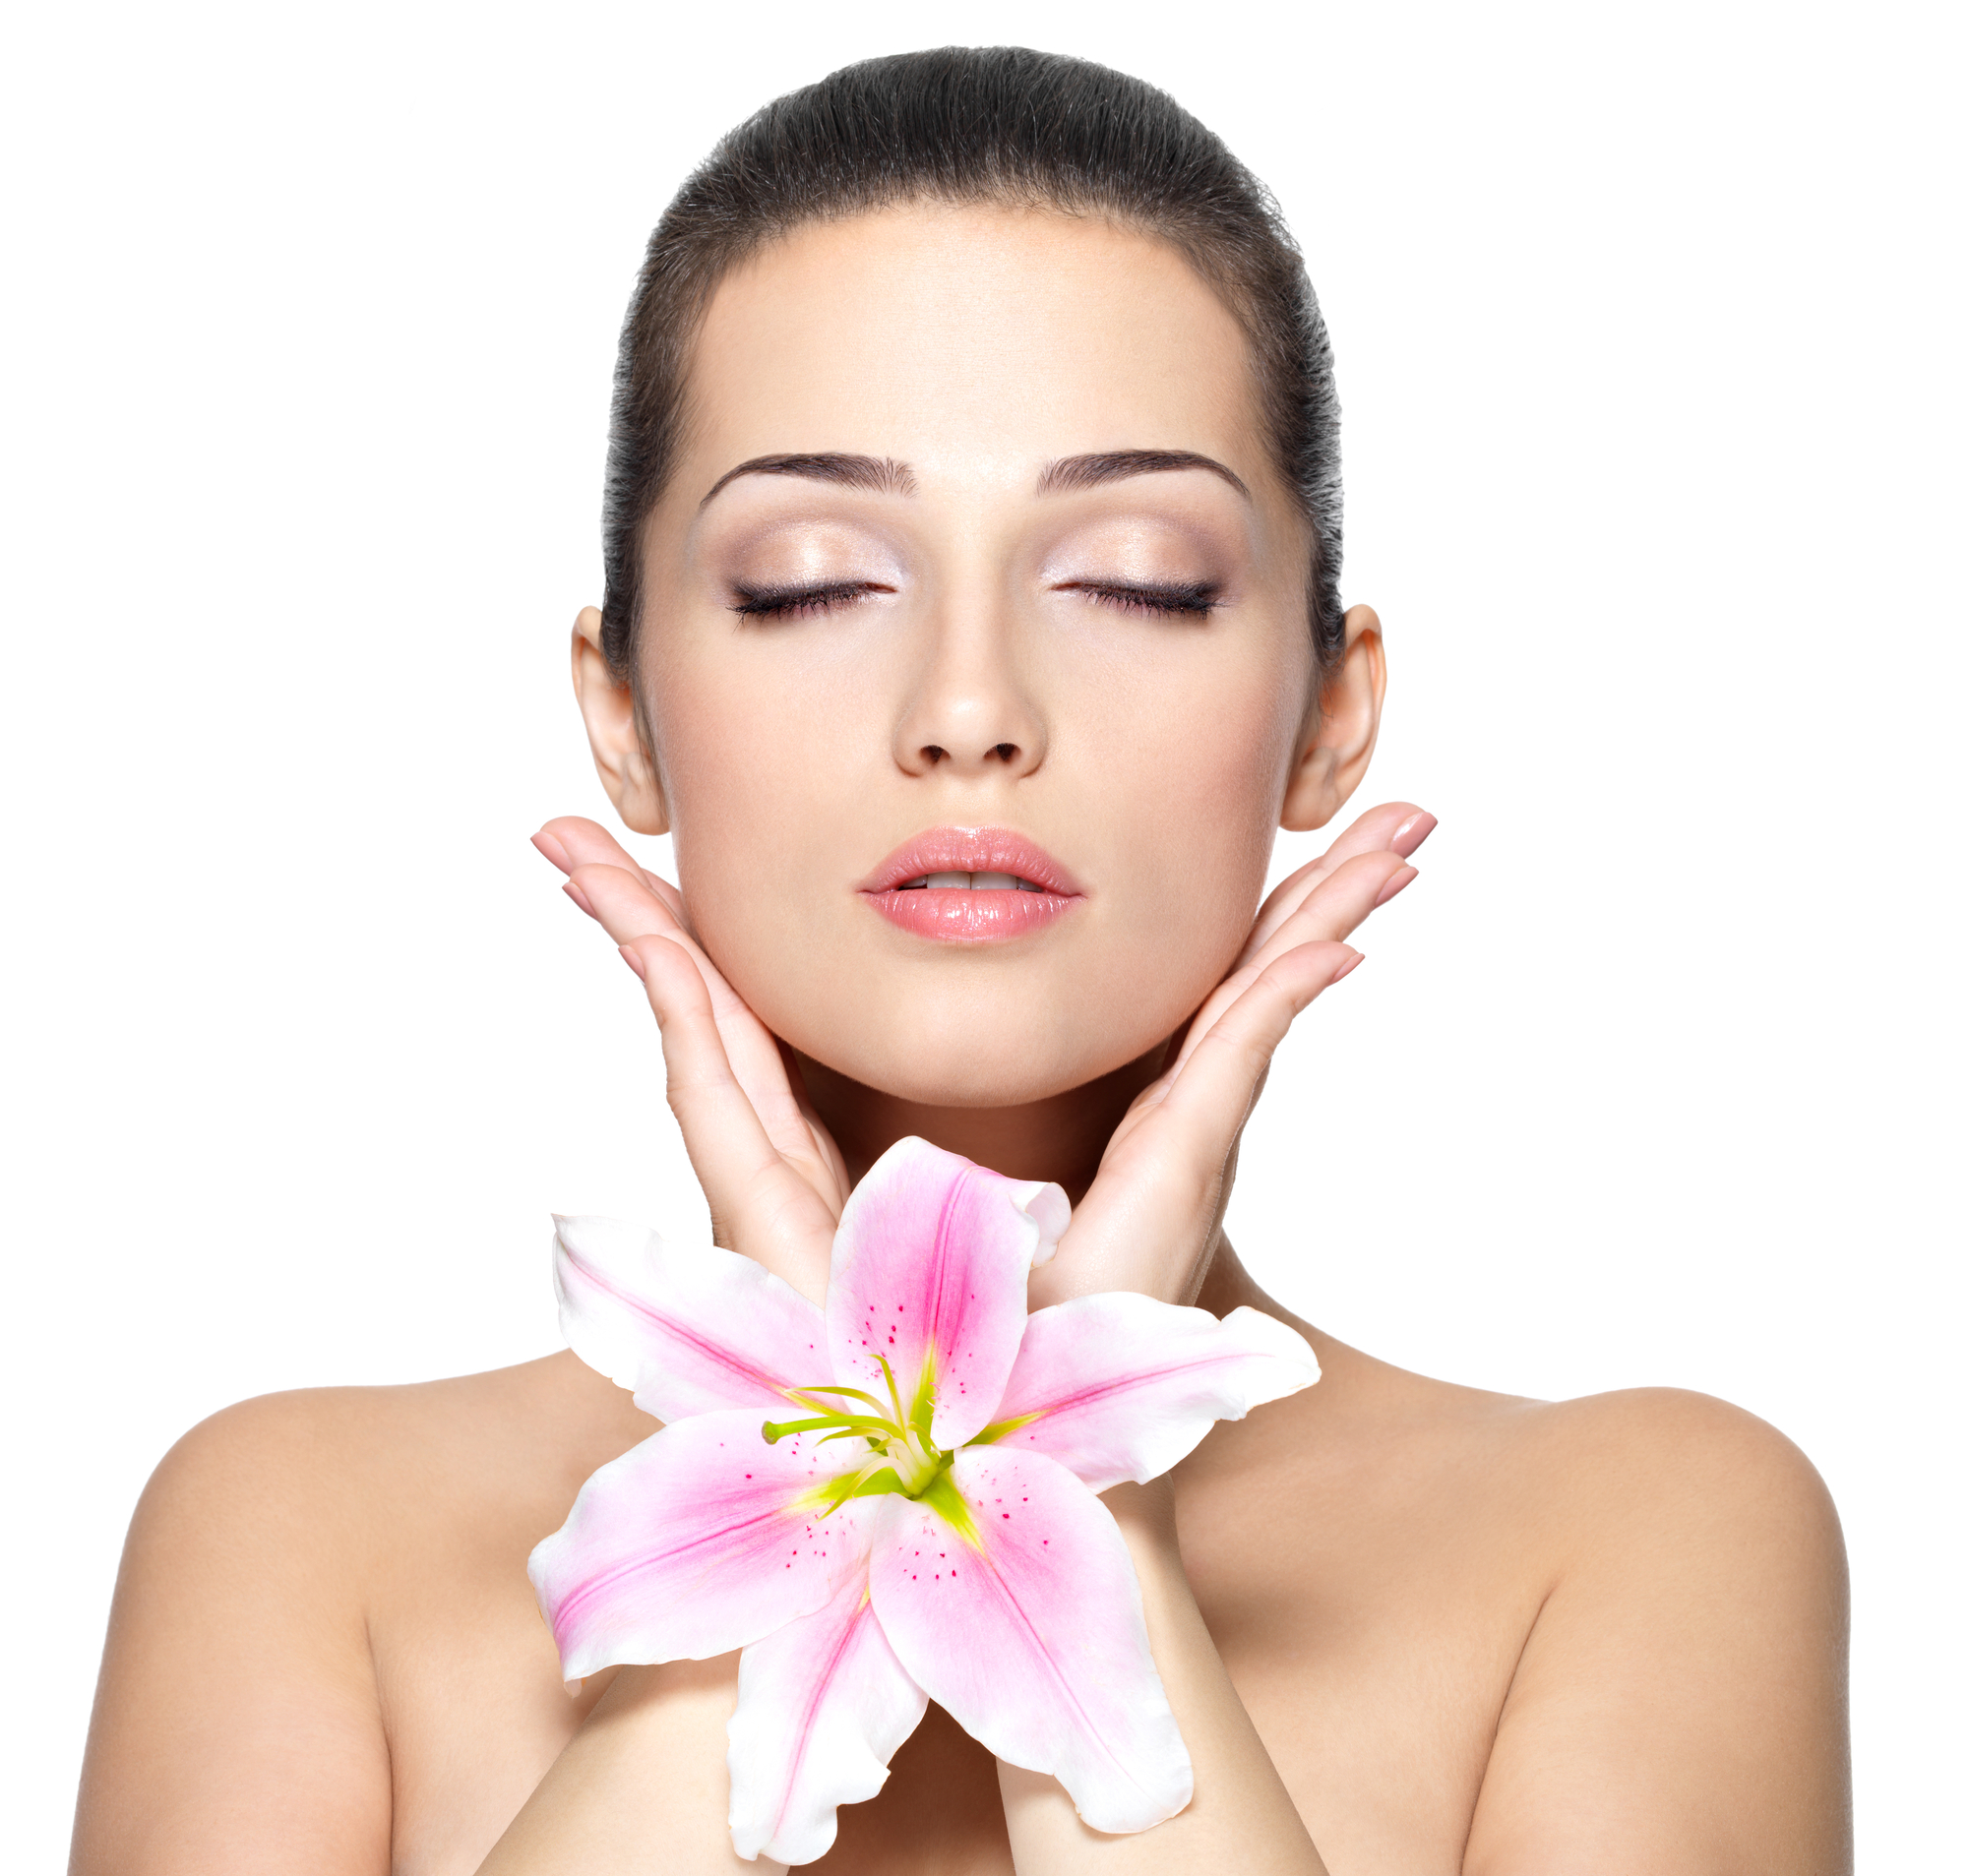 Beauty face of young woman with flower. Beauty treatment concept. Portrait of young woman with closed eyes